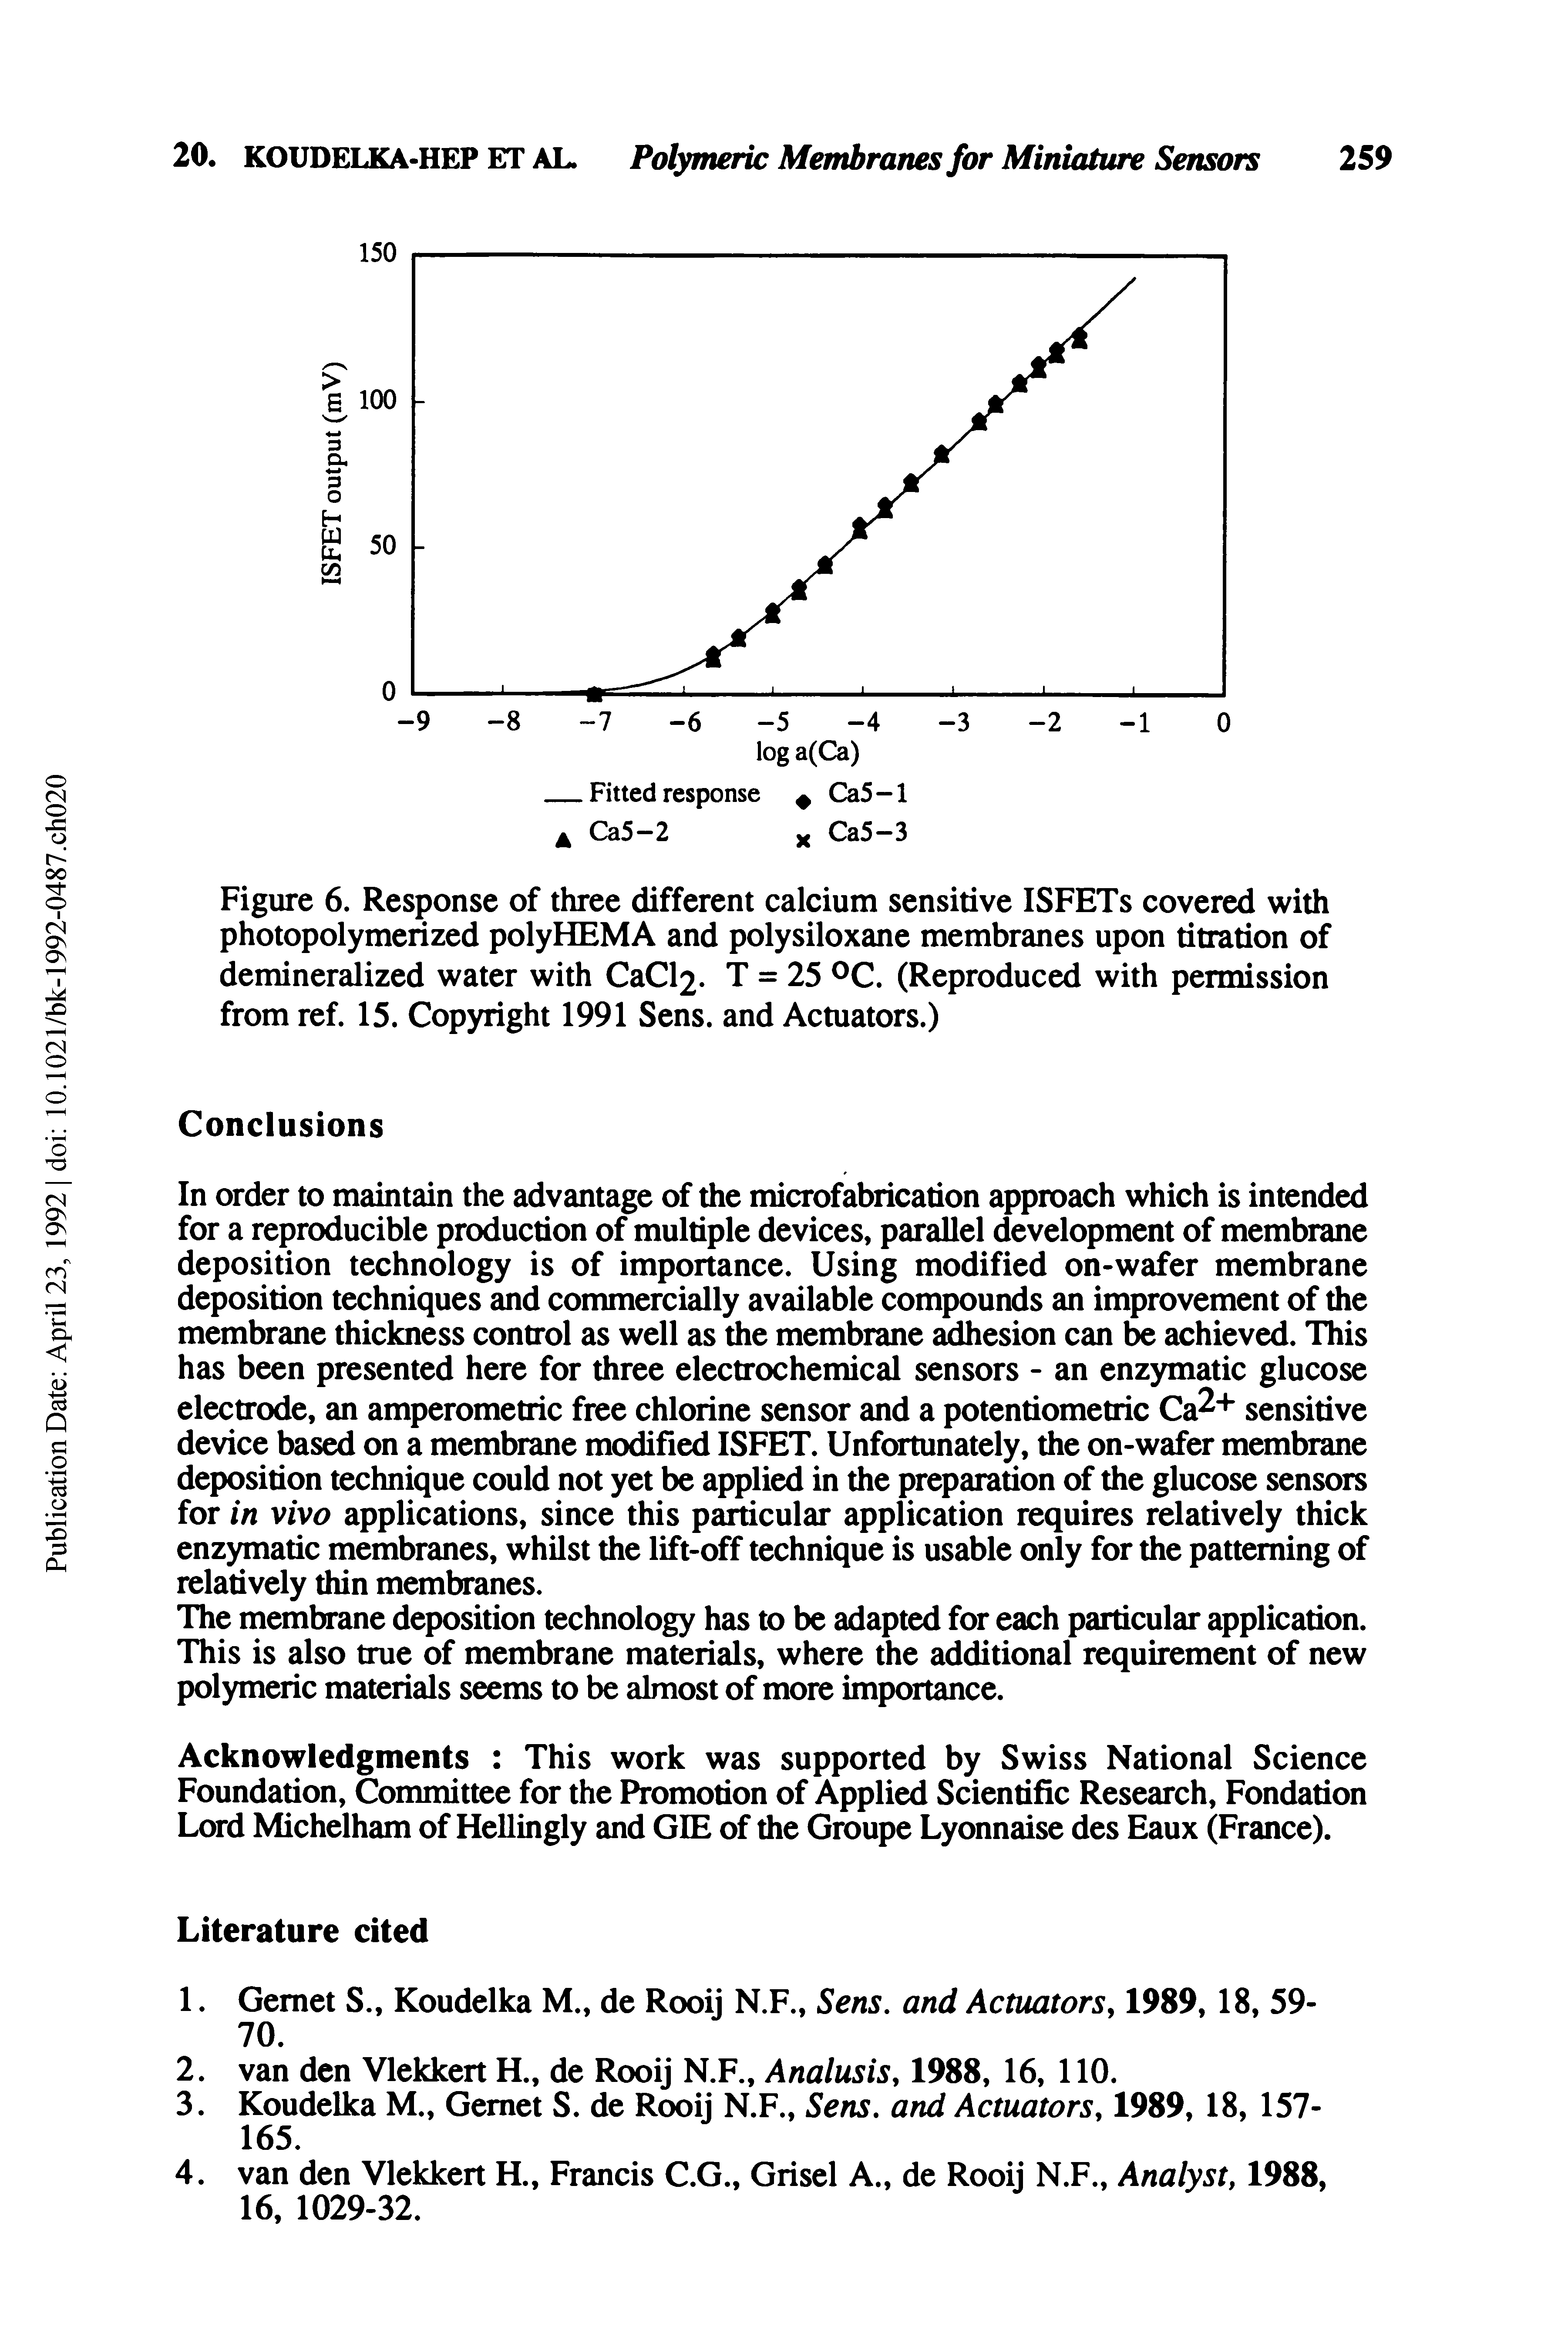 Figure 6. Response of three different calcium sensitive ISFETs covered with photopolymerized polyHEMA and polysiloxane membranes upon titration of demineralized water with CaCl2- T = 25 °C. (Reproduced with permission from ref. 15. Copyright 1991 Sens, and Actuators.)...